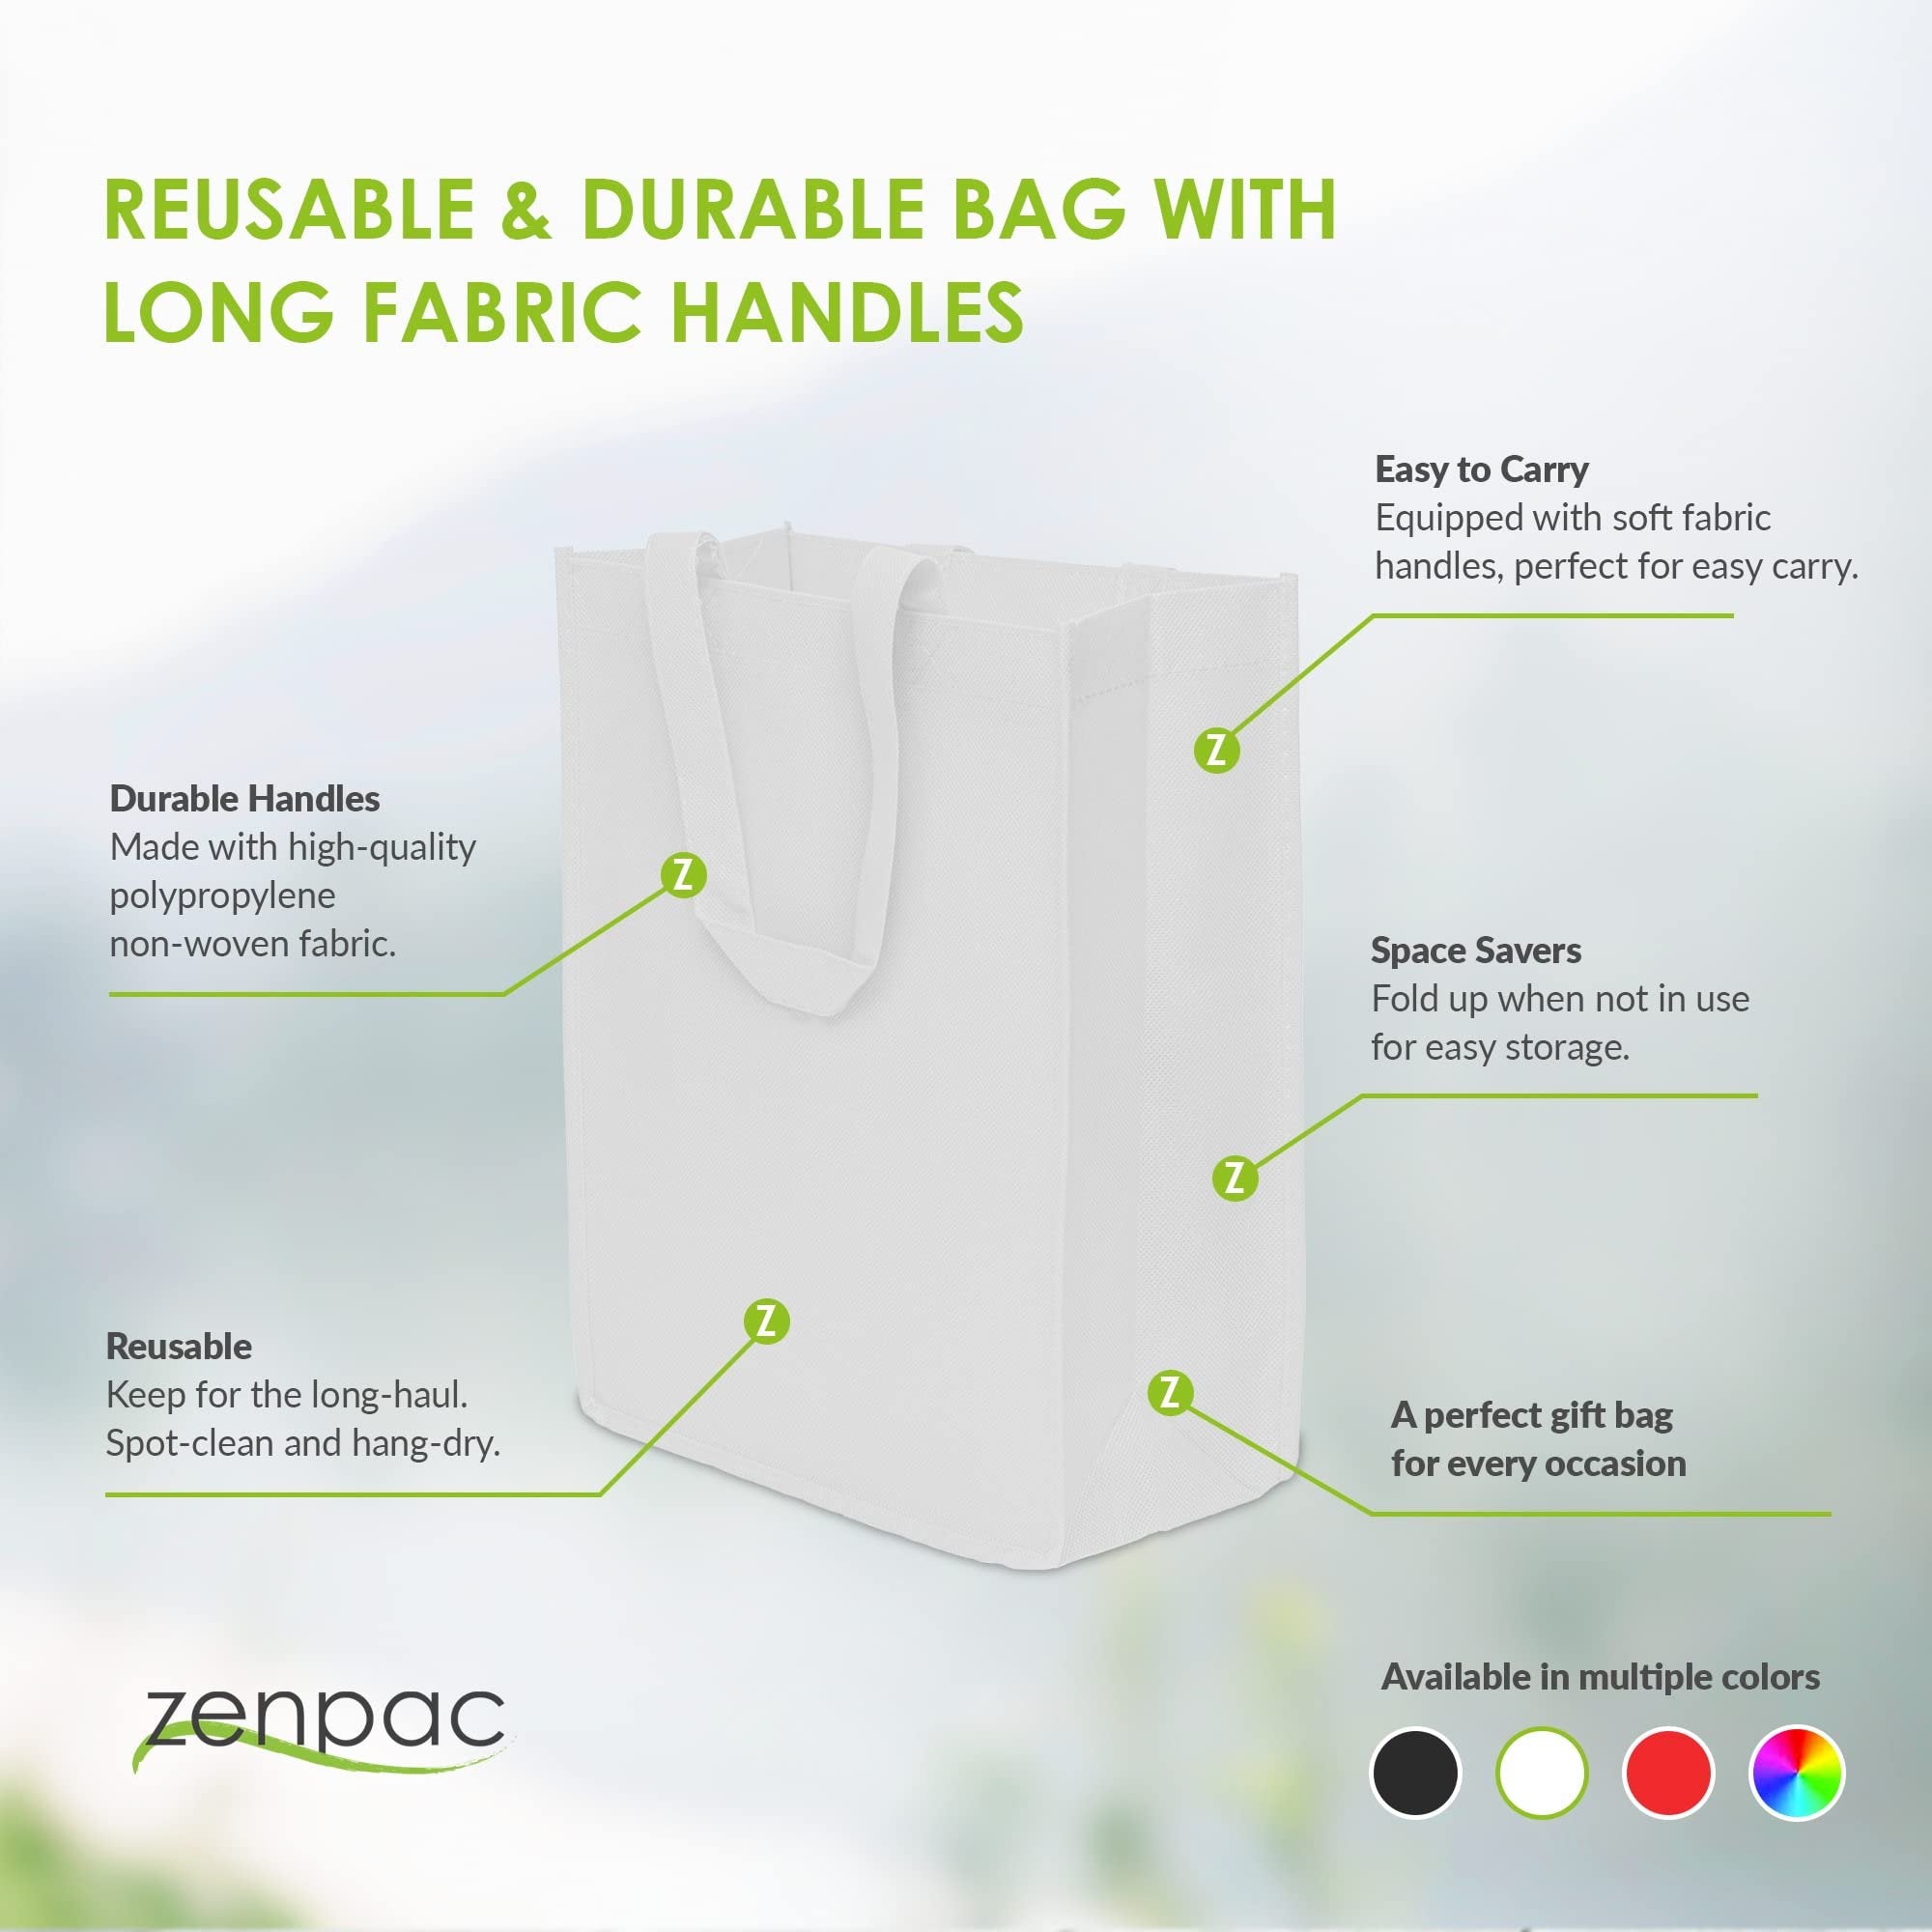 Reusable Bags - 12 Pack Medium White Heavy Duty Tote Bag with Handles, Blank Totes with Durable Stitched Handles for Grocery Shopping, Gifts, Retail, Small Businesses, Boutiques, Bulk - 10x5x13